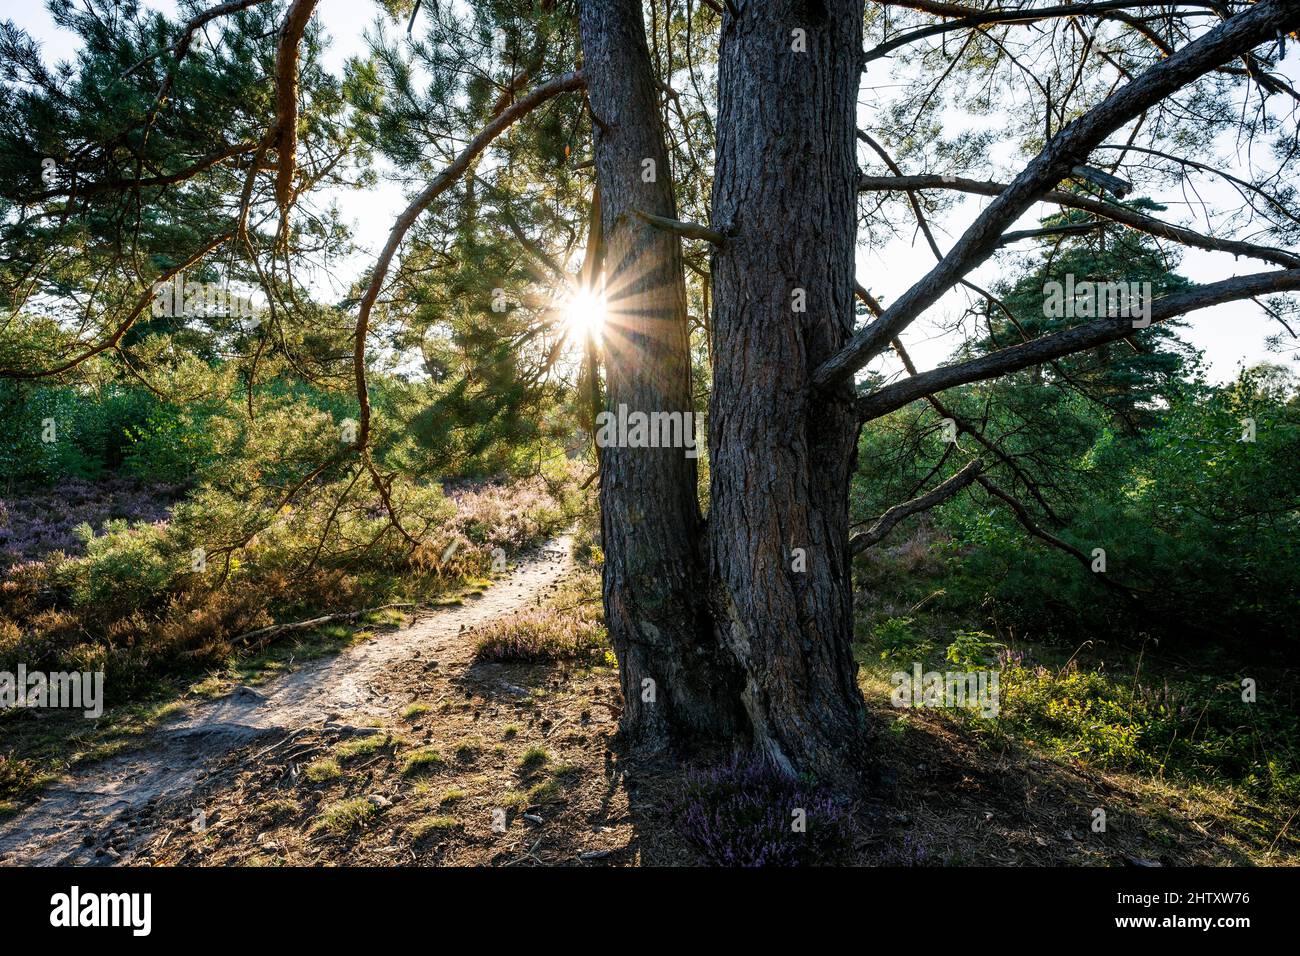 Old scots pine (Pinus sylvestris) and path, backlit with sunstar, in heath landscape, Wietzer Berg, Lower Saxony, Germany Stock Photo